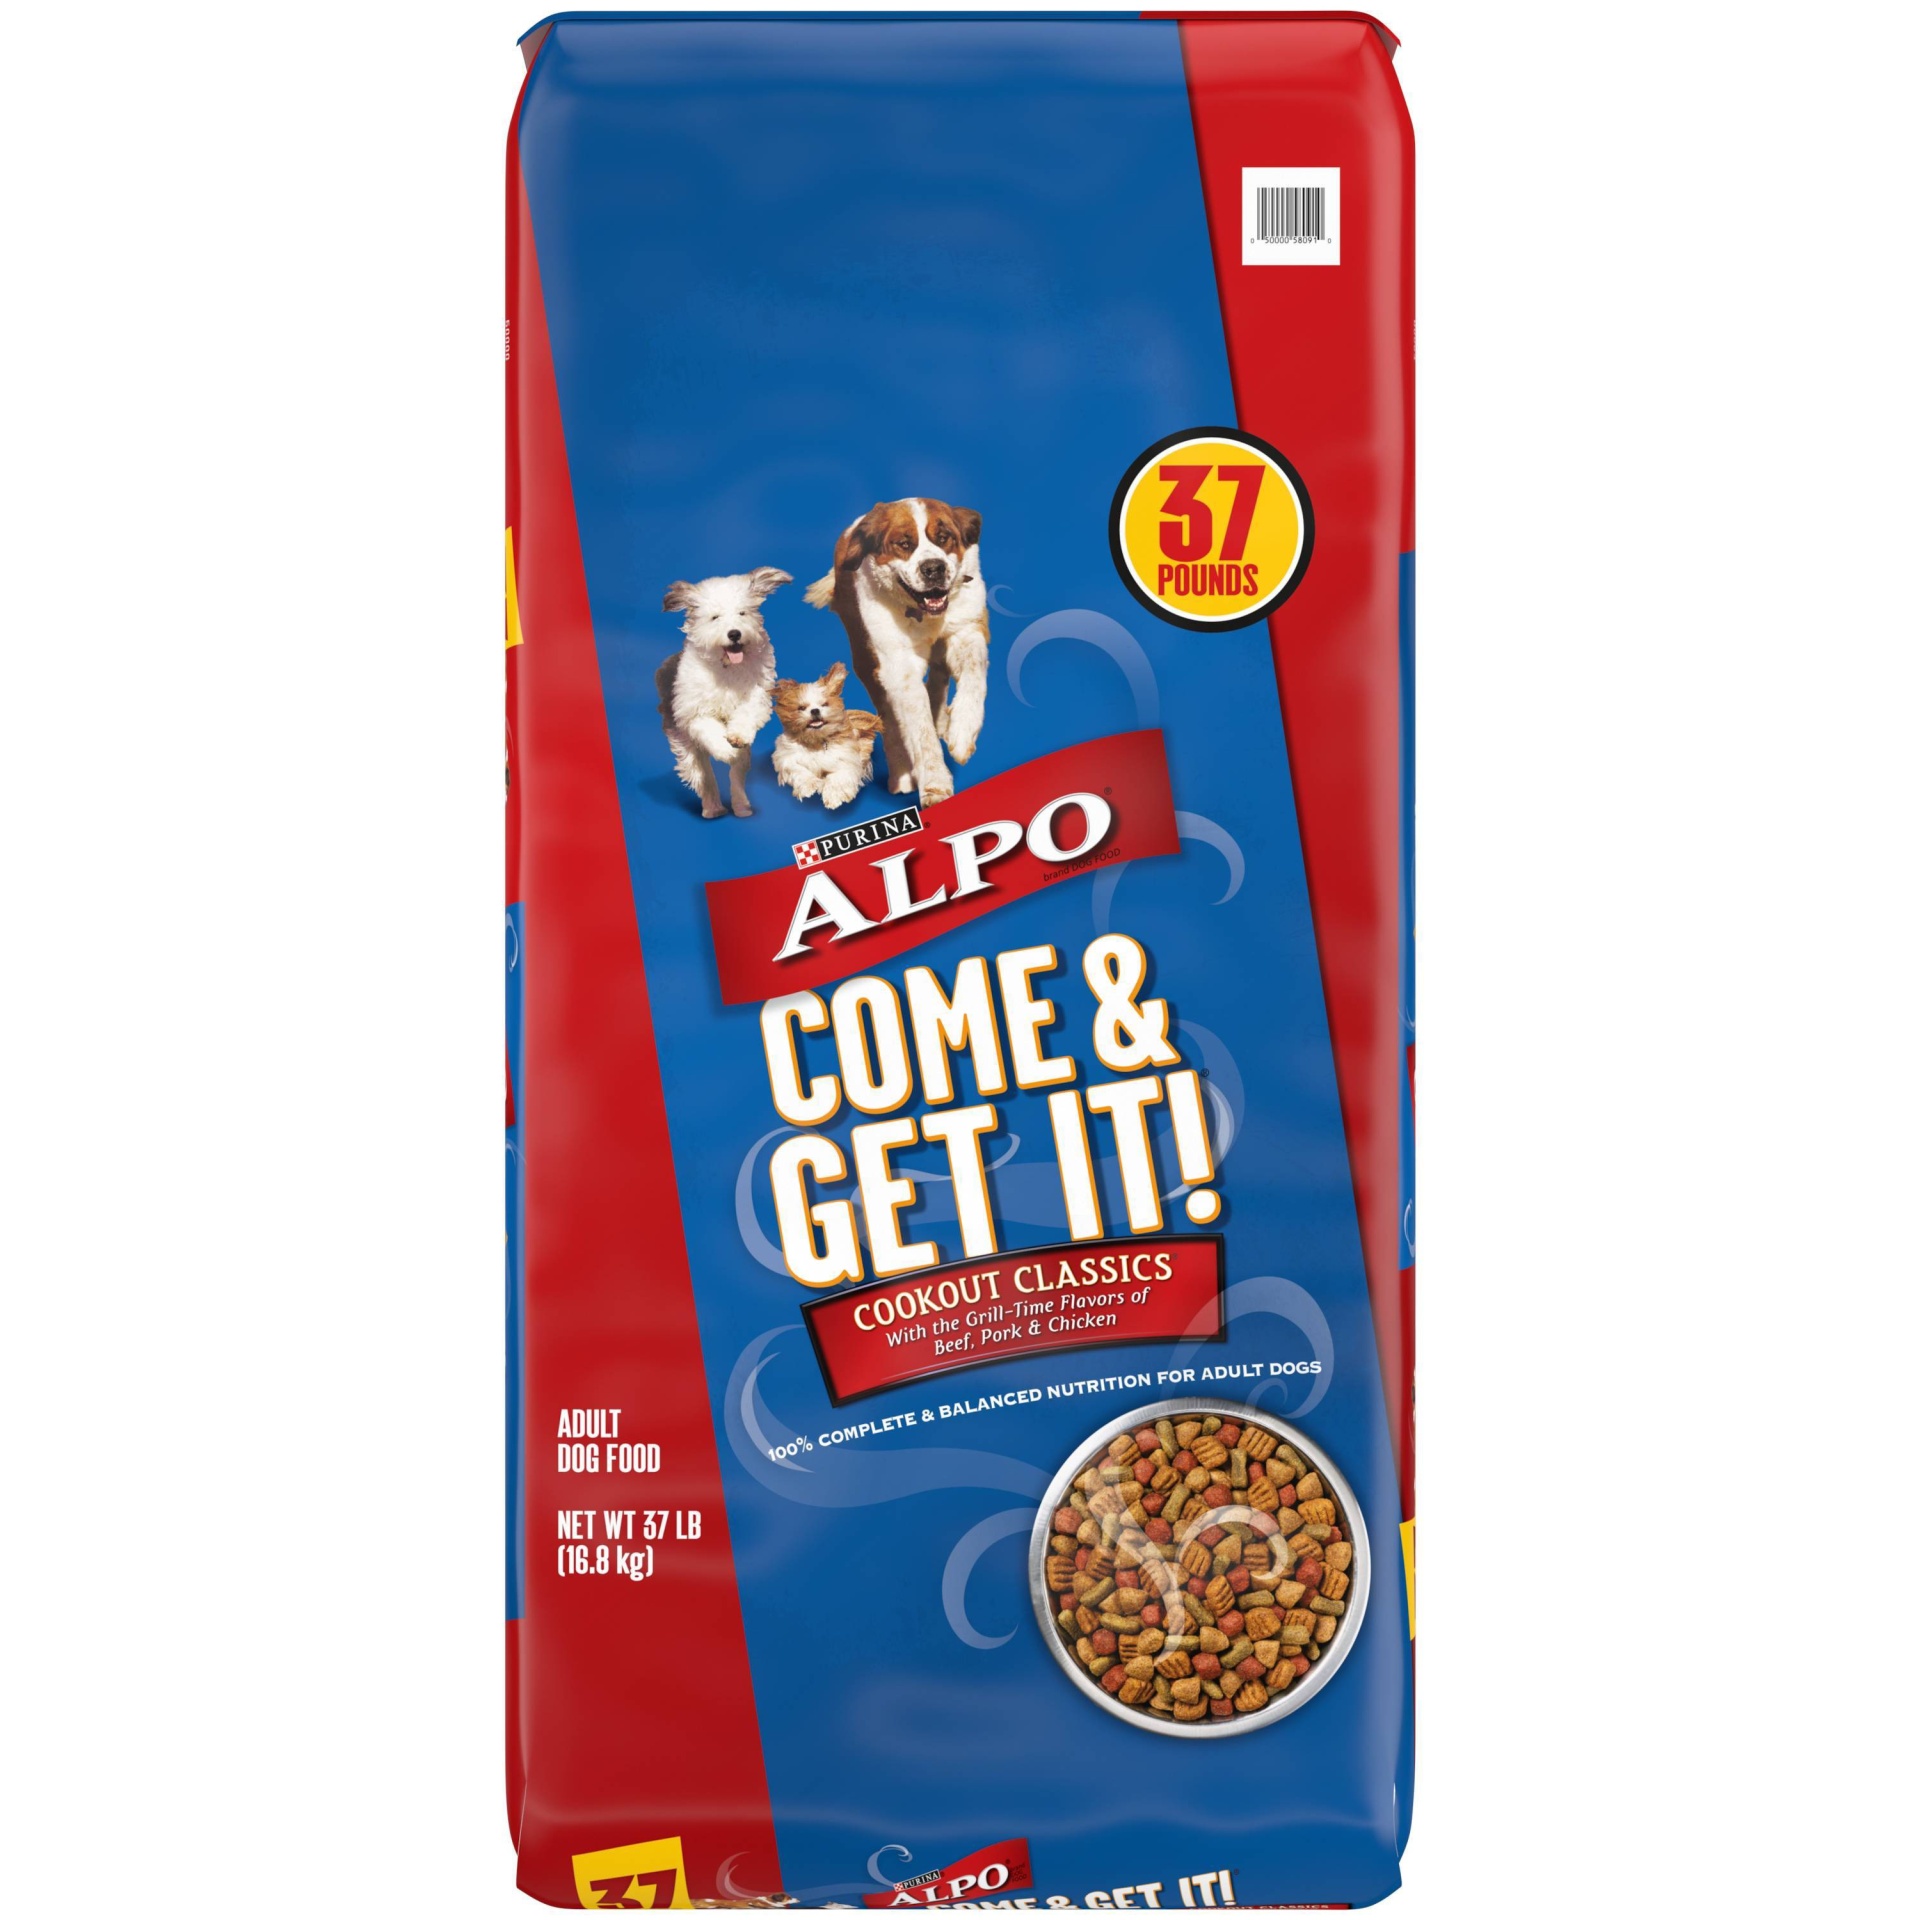 slide 1 of 1, Purina Alpo Come & Get It! Cookout Classics with Beef, Pork & Chicken Flavors Adult Complete & Balanced Dry Dog Food - 37lbs, 37 lb